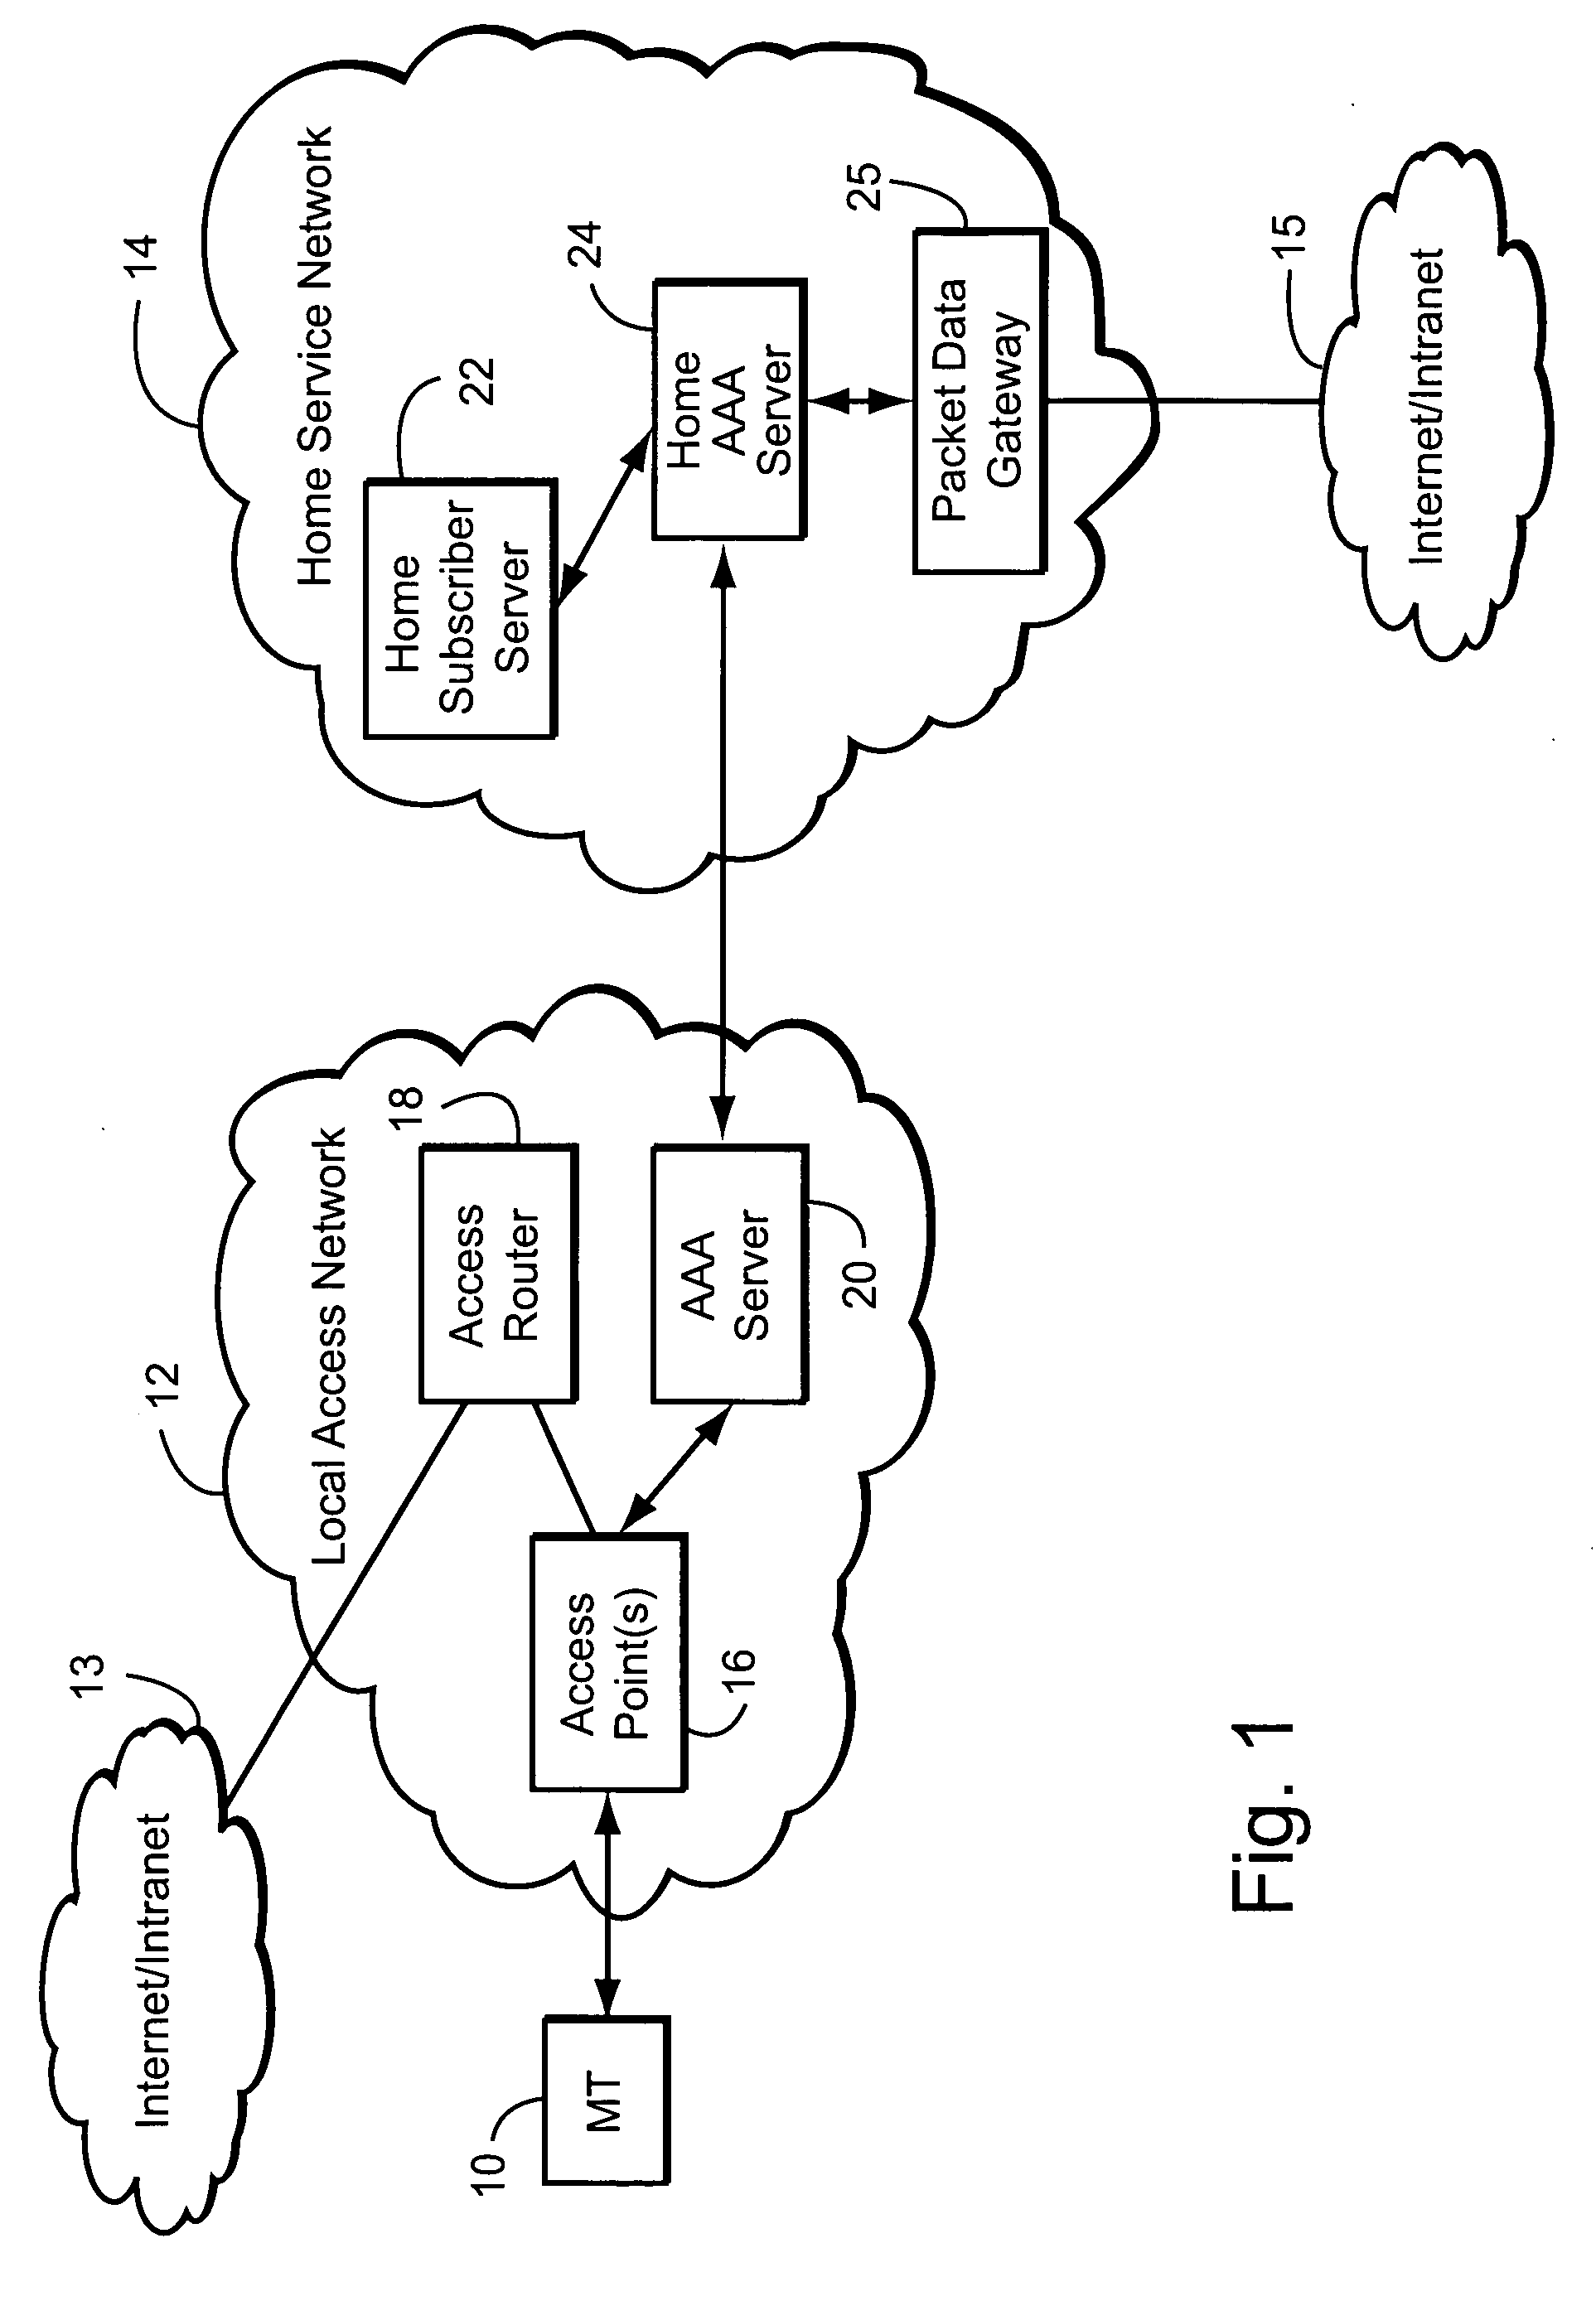 Home network-assisted selection of intermediary network for a roaming mobile terminal